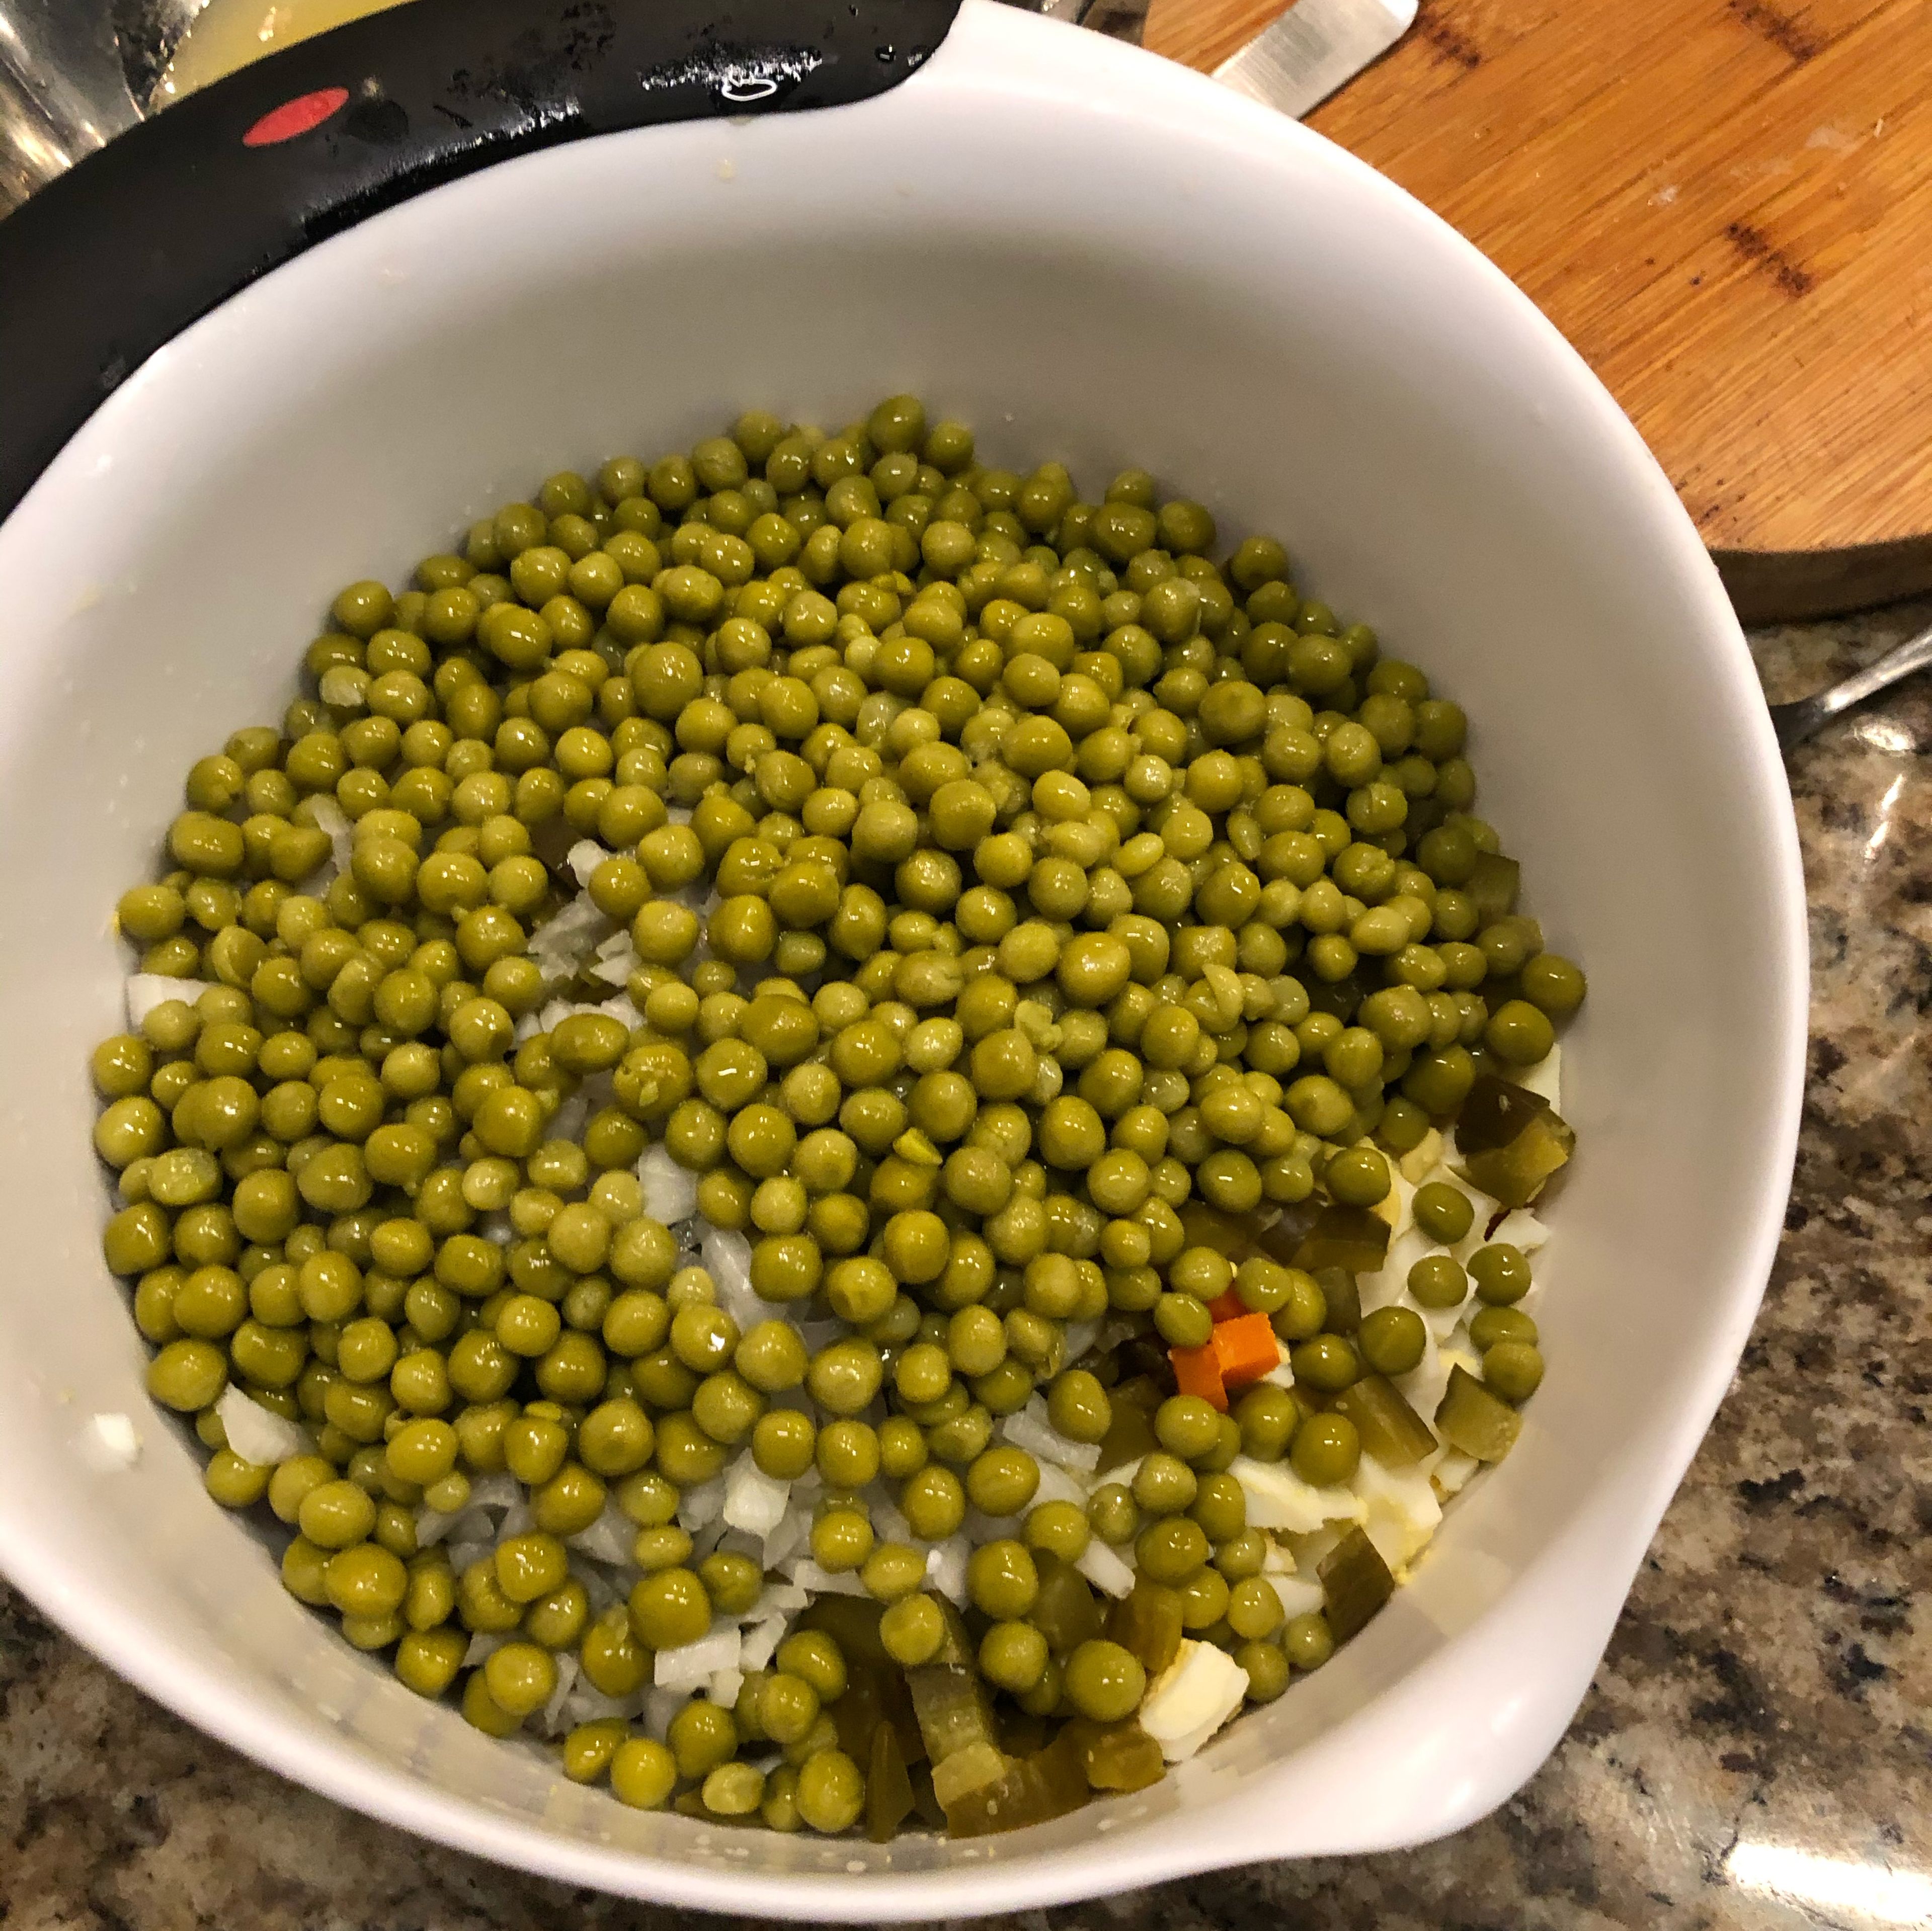 Add a can of peas to the bowl